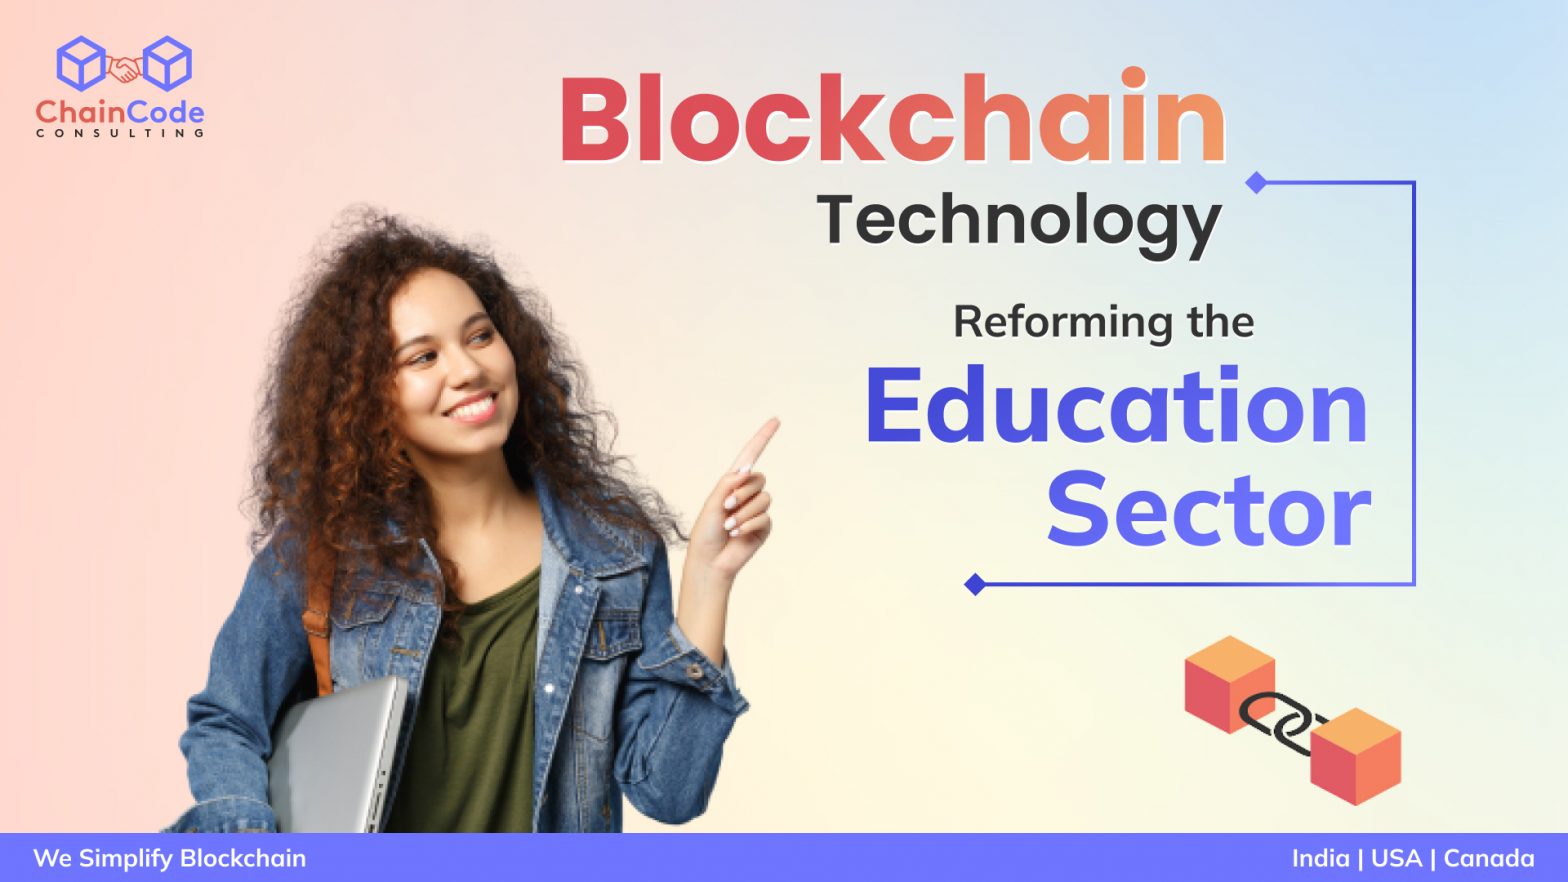 Blockchain technology reforming the education sector